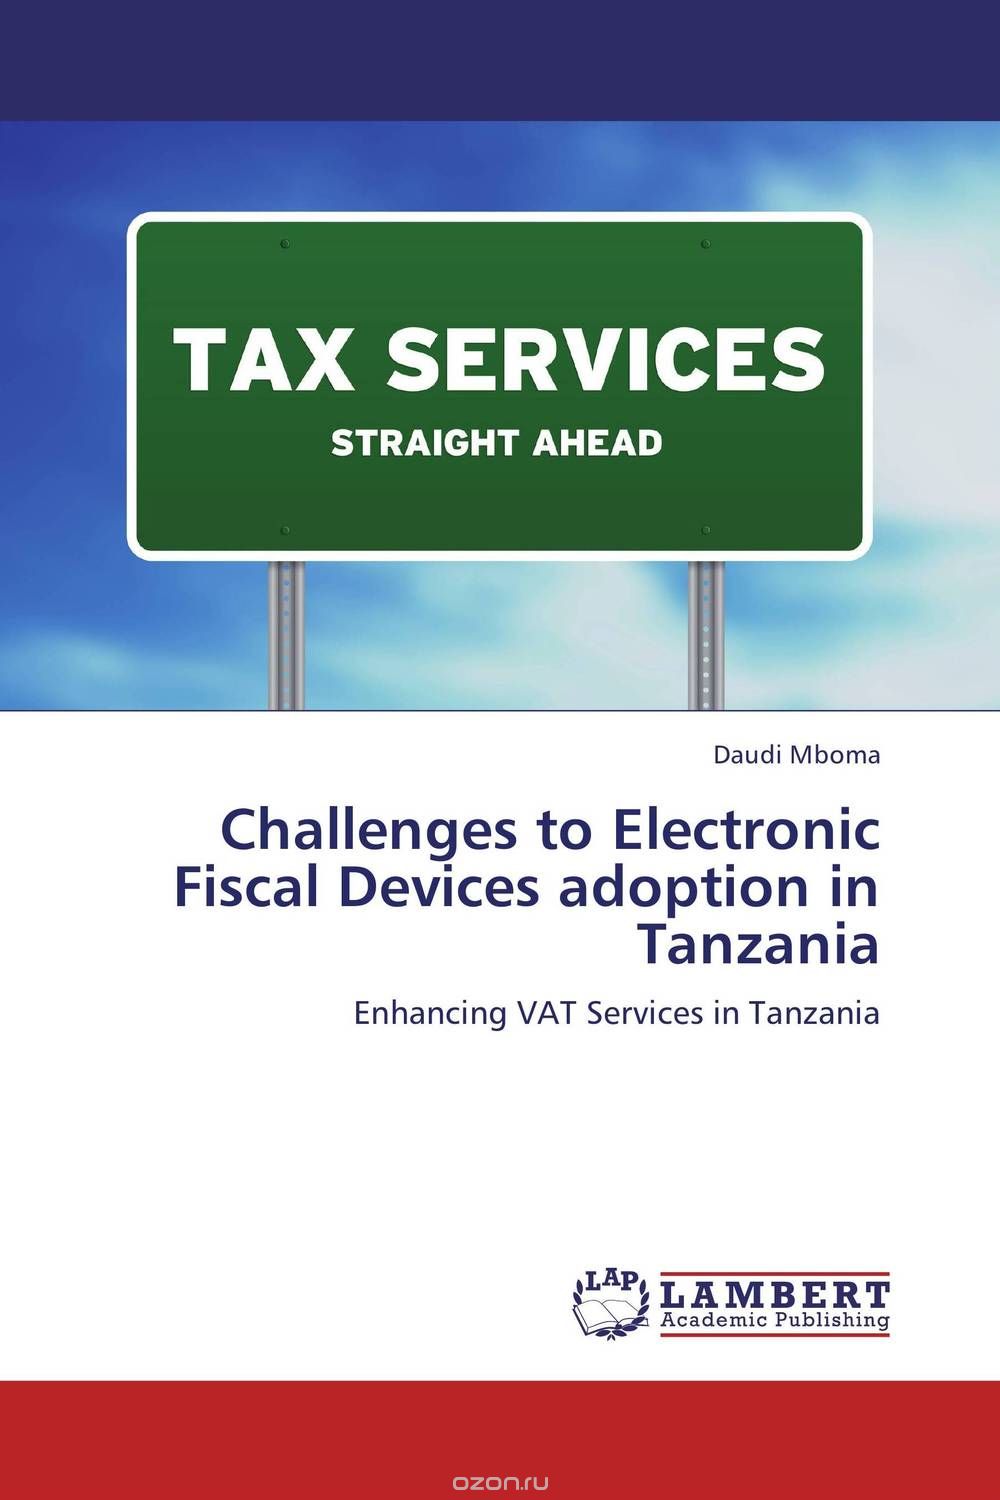 Скачать книгу "Challenges to Electronic Fiscal Devices adoption in Tanzania"